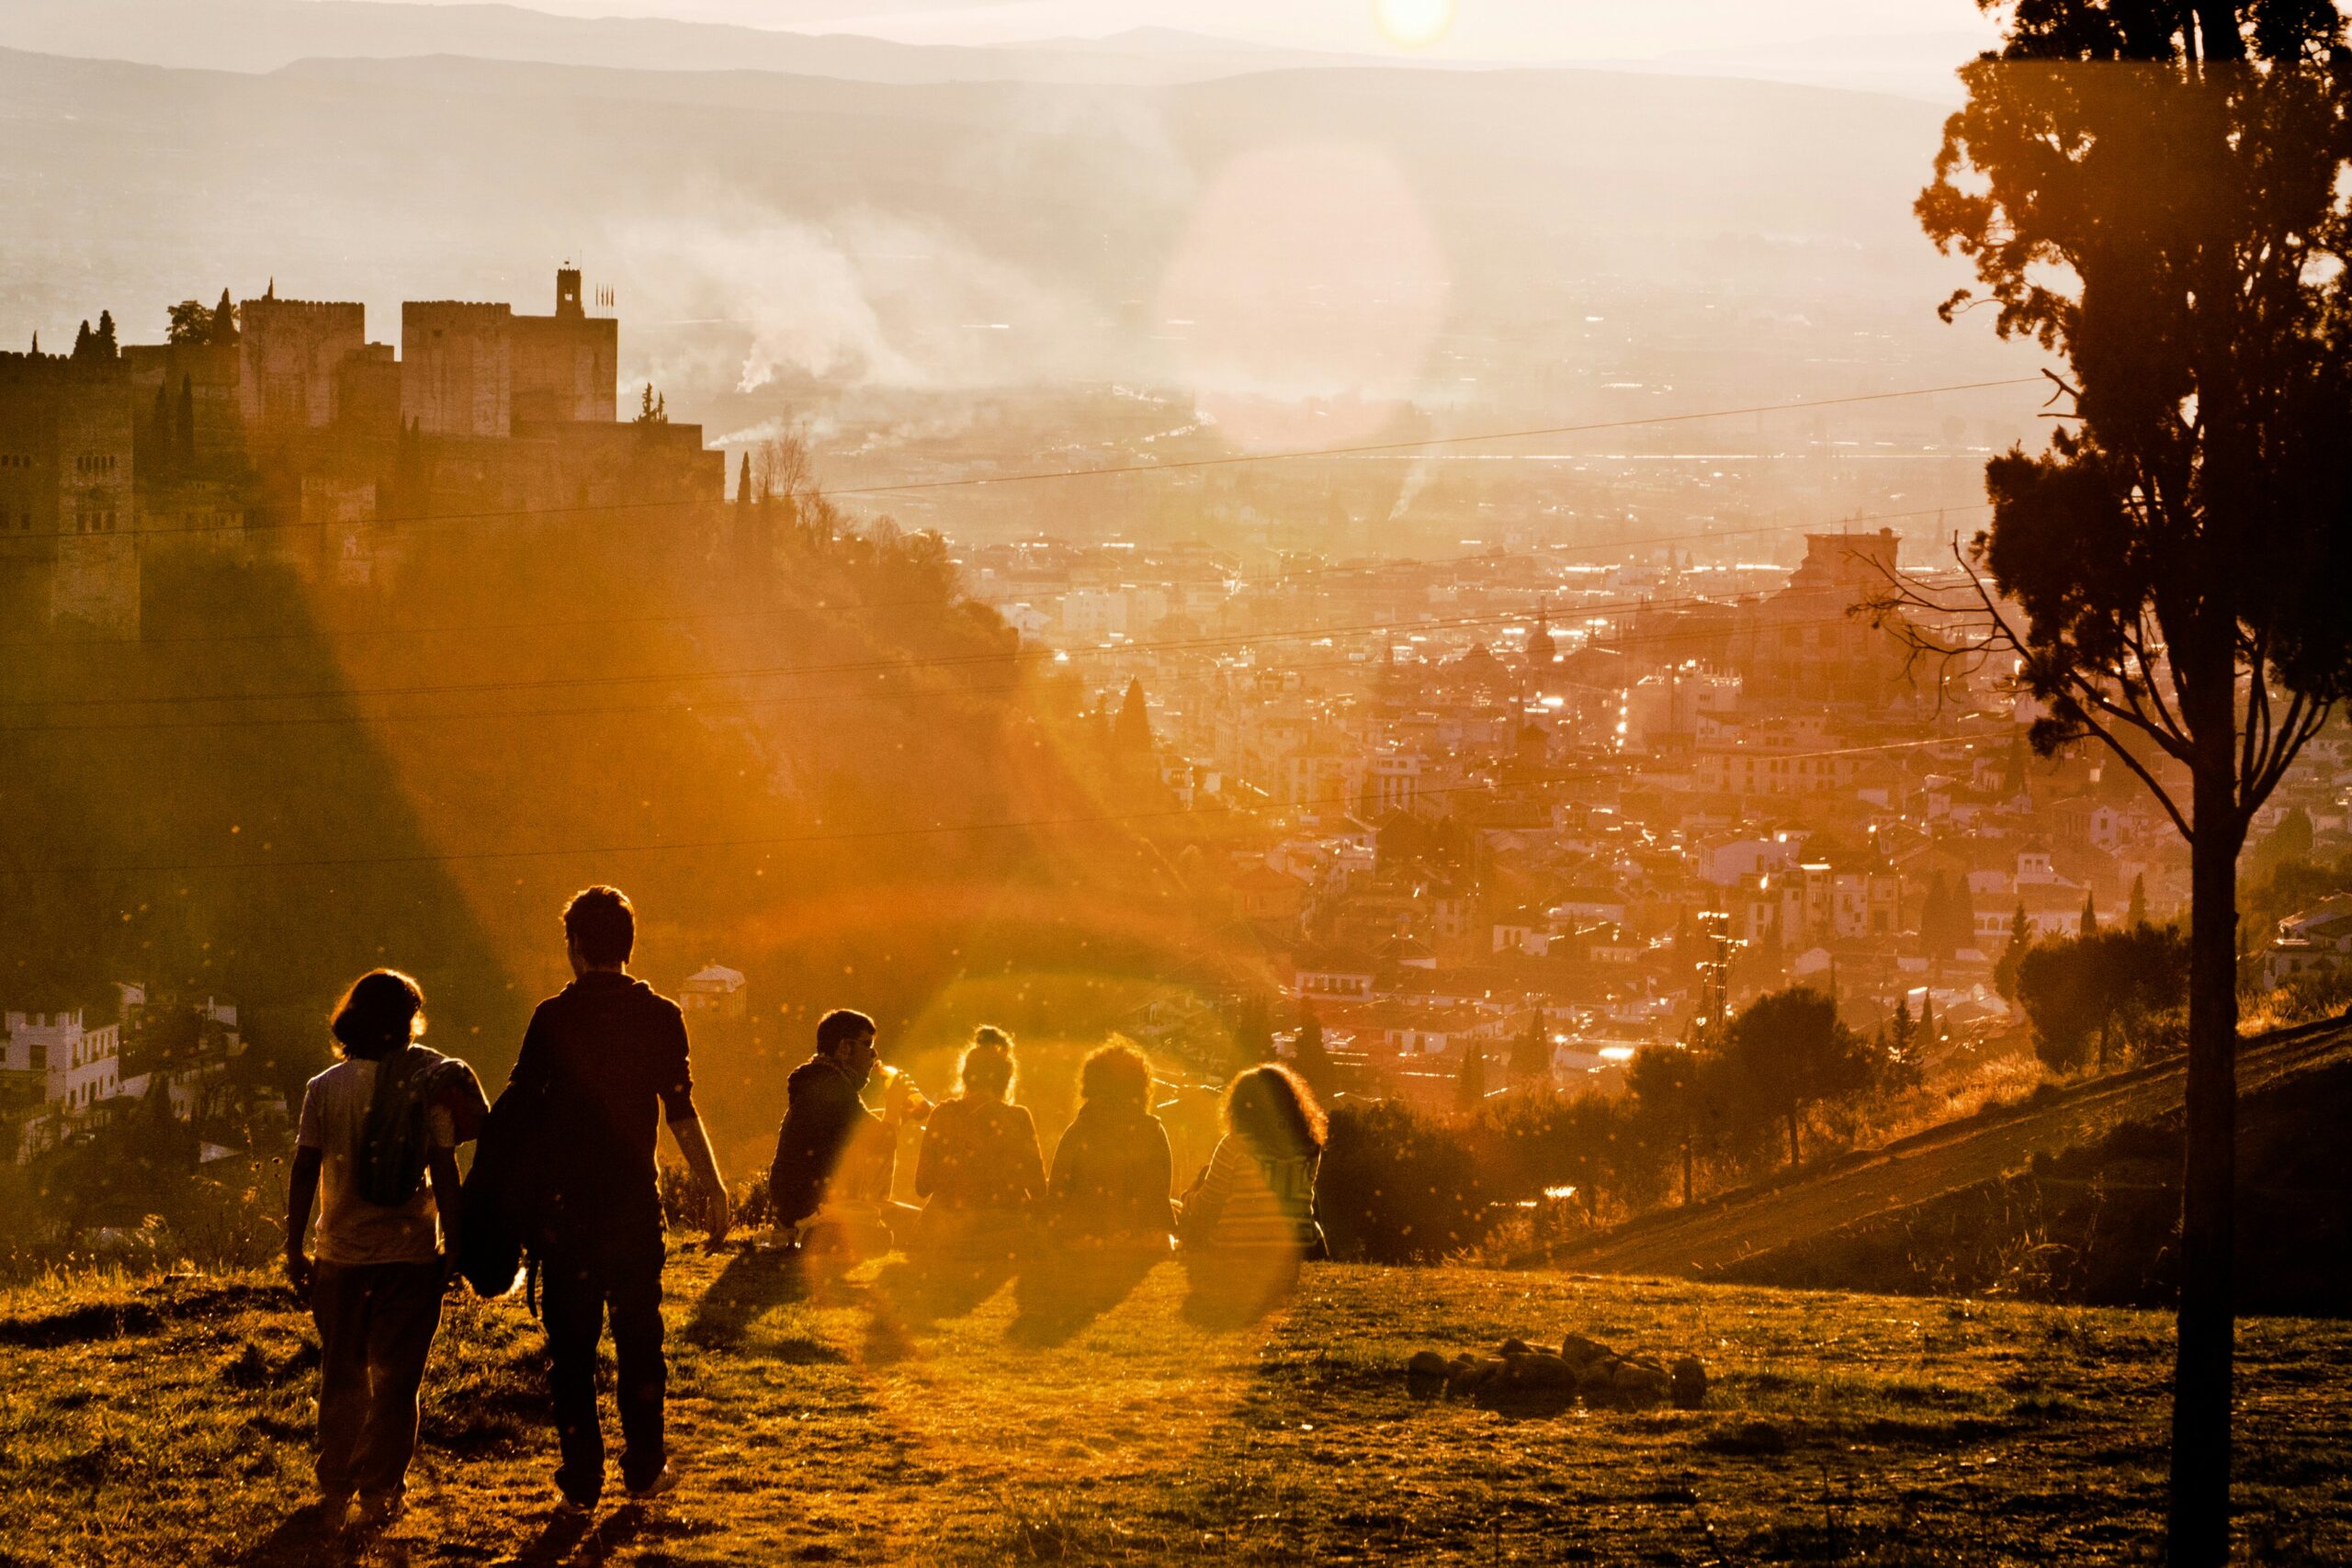 Young people gather to enjoy a beautiful sunset in Granada, Spain